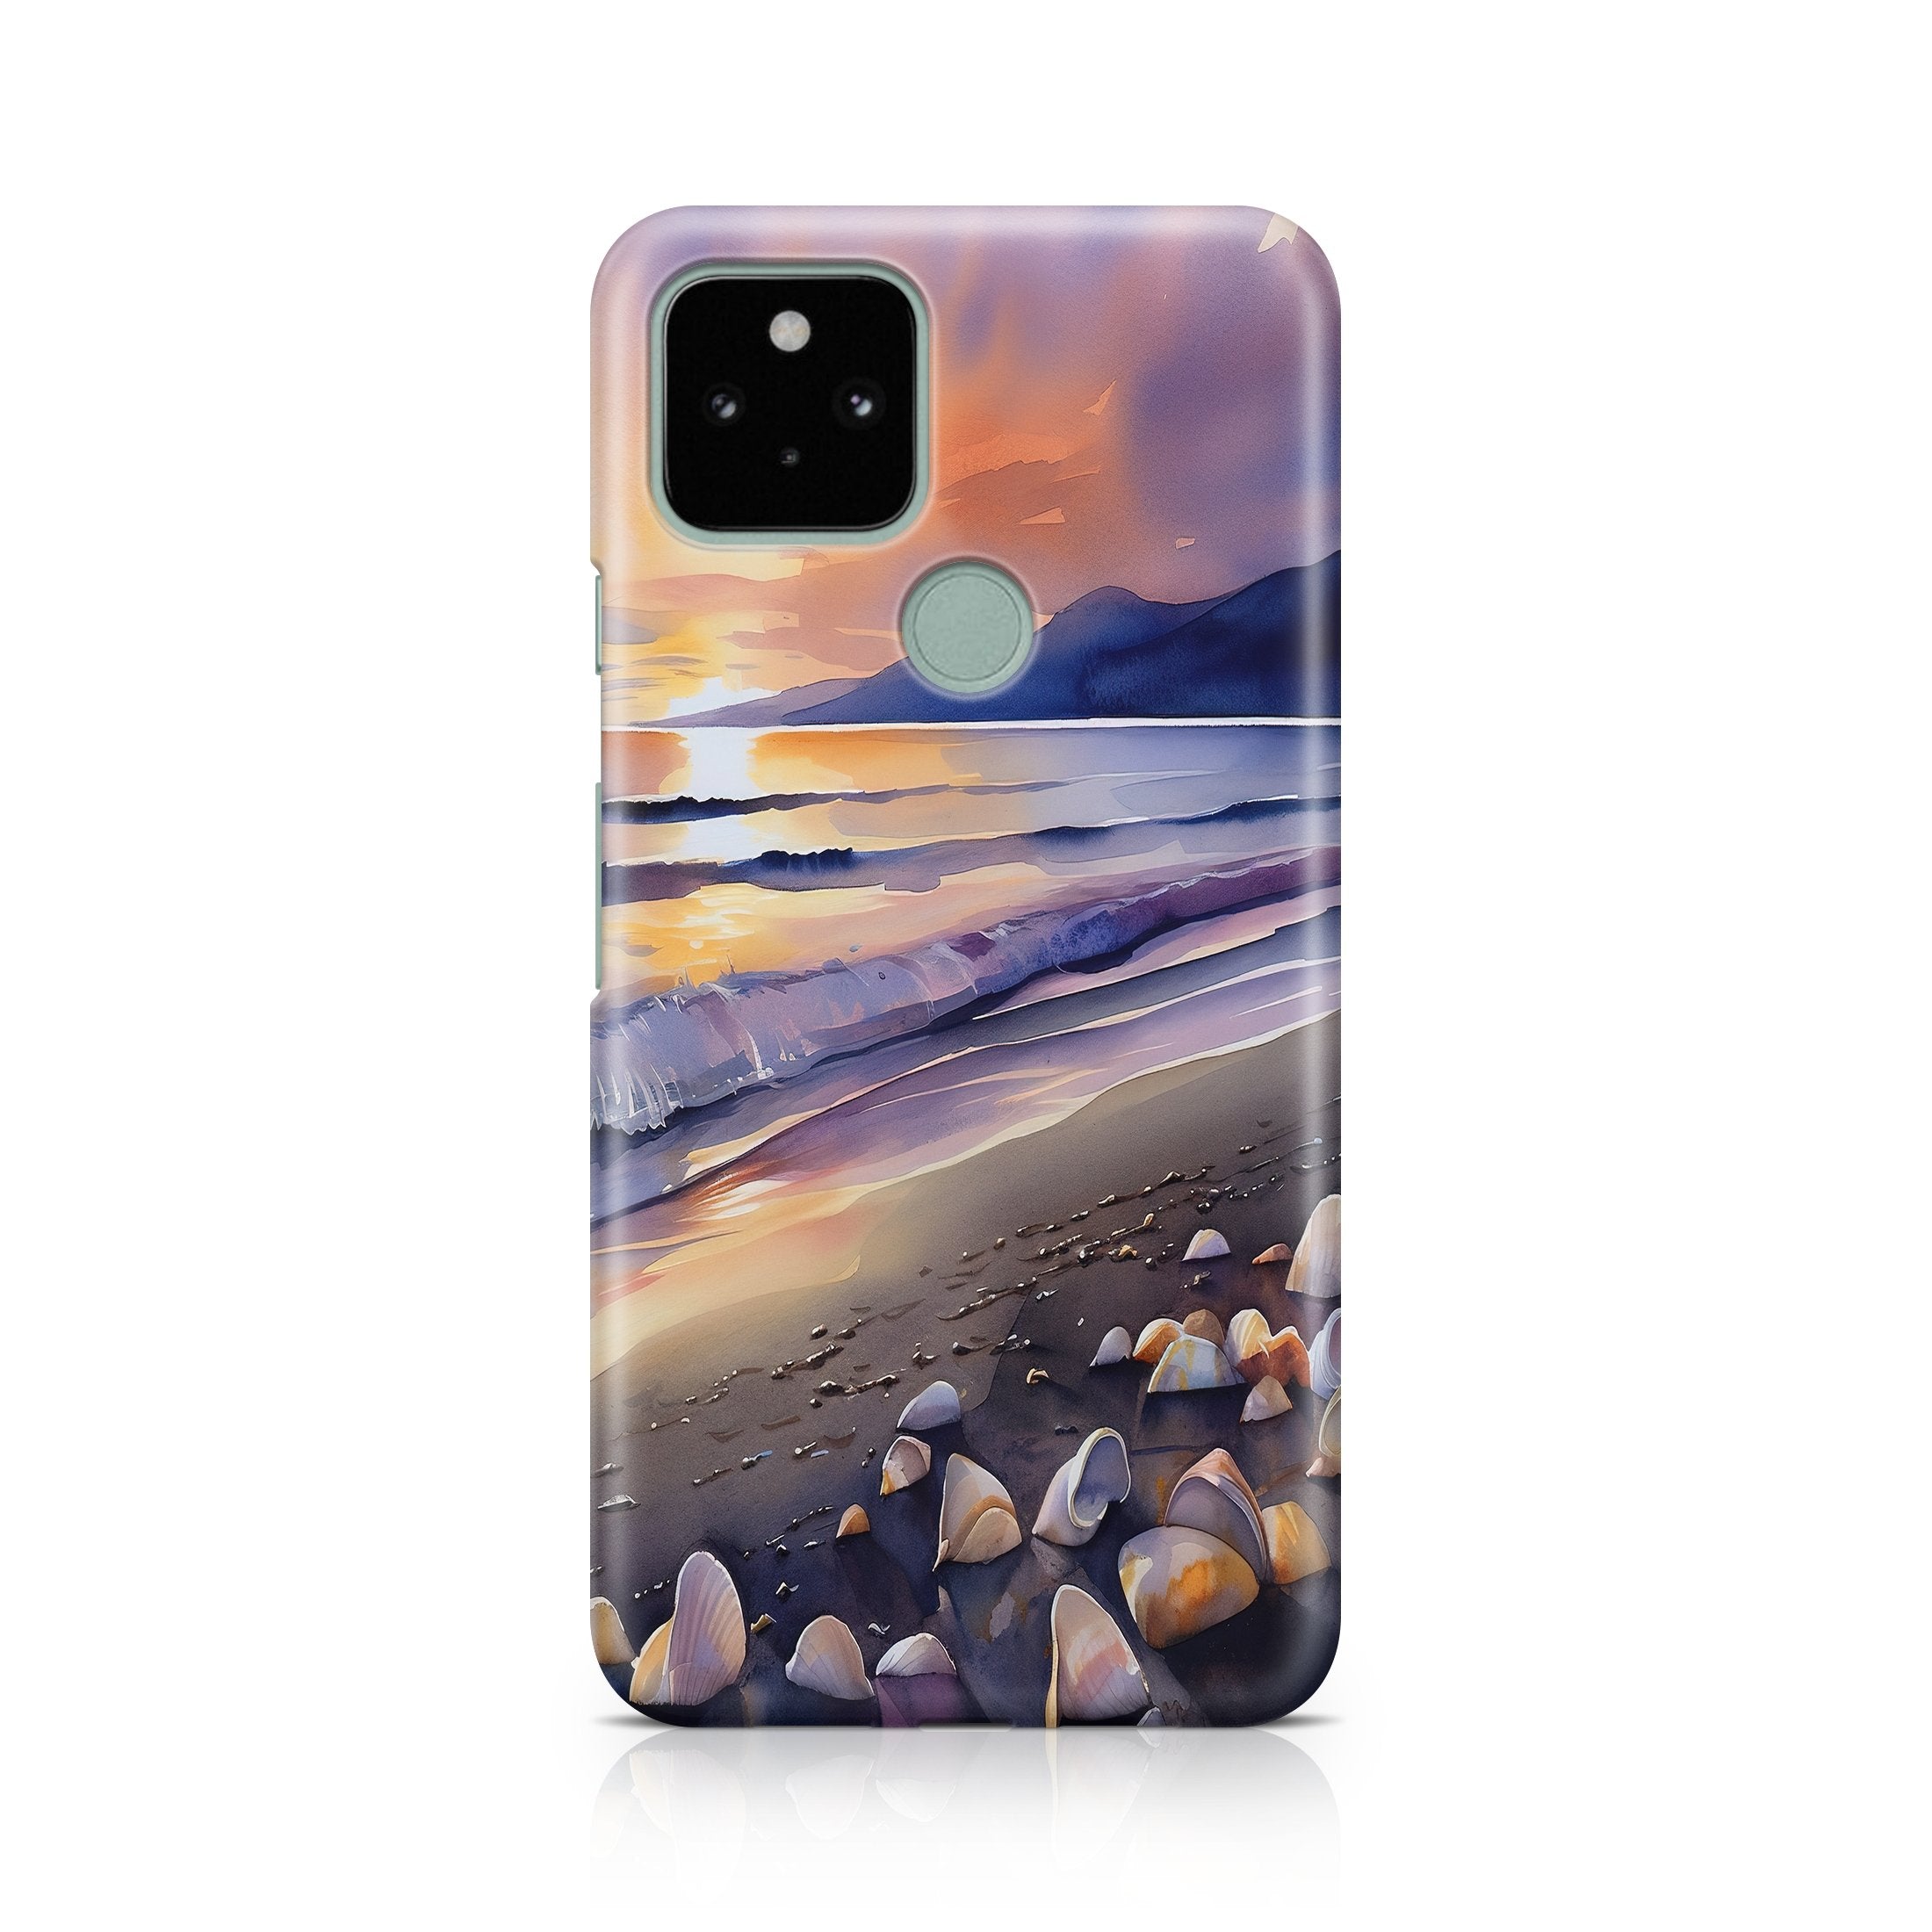 Watercolor Tides - Google phone case designs by CaseSwagger